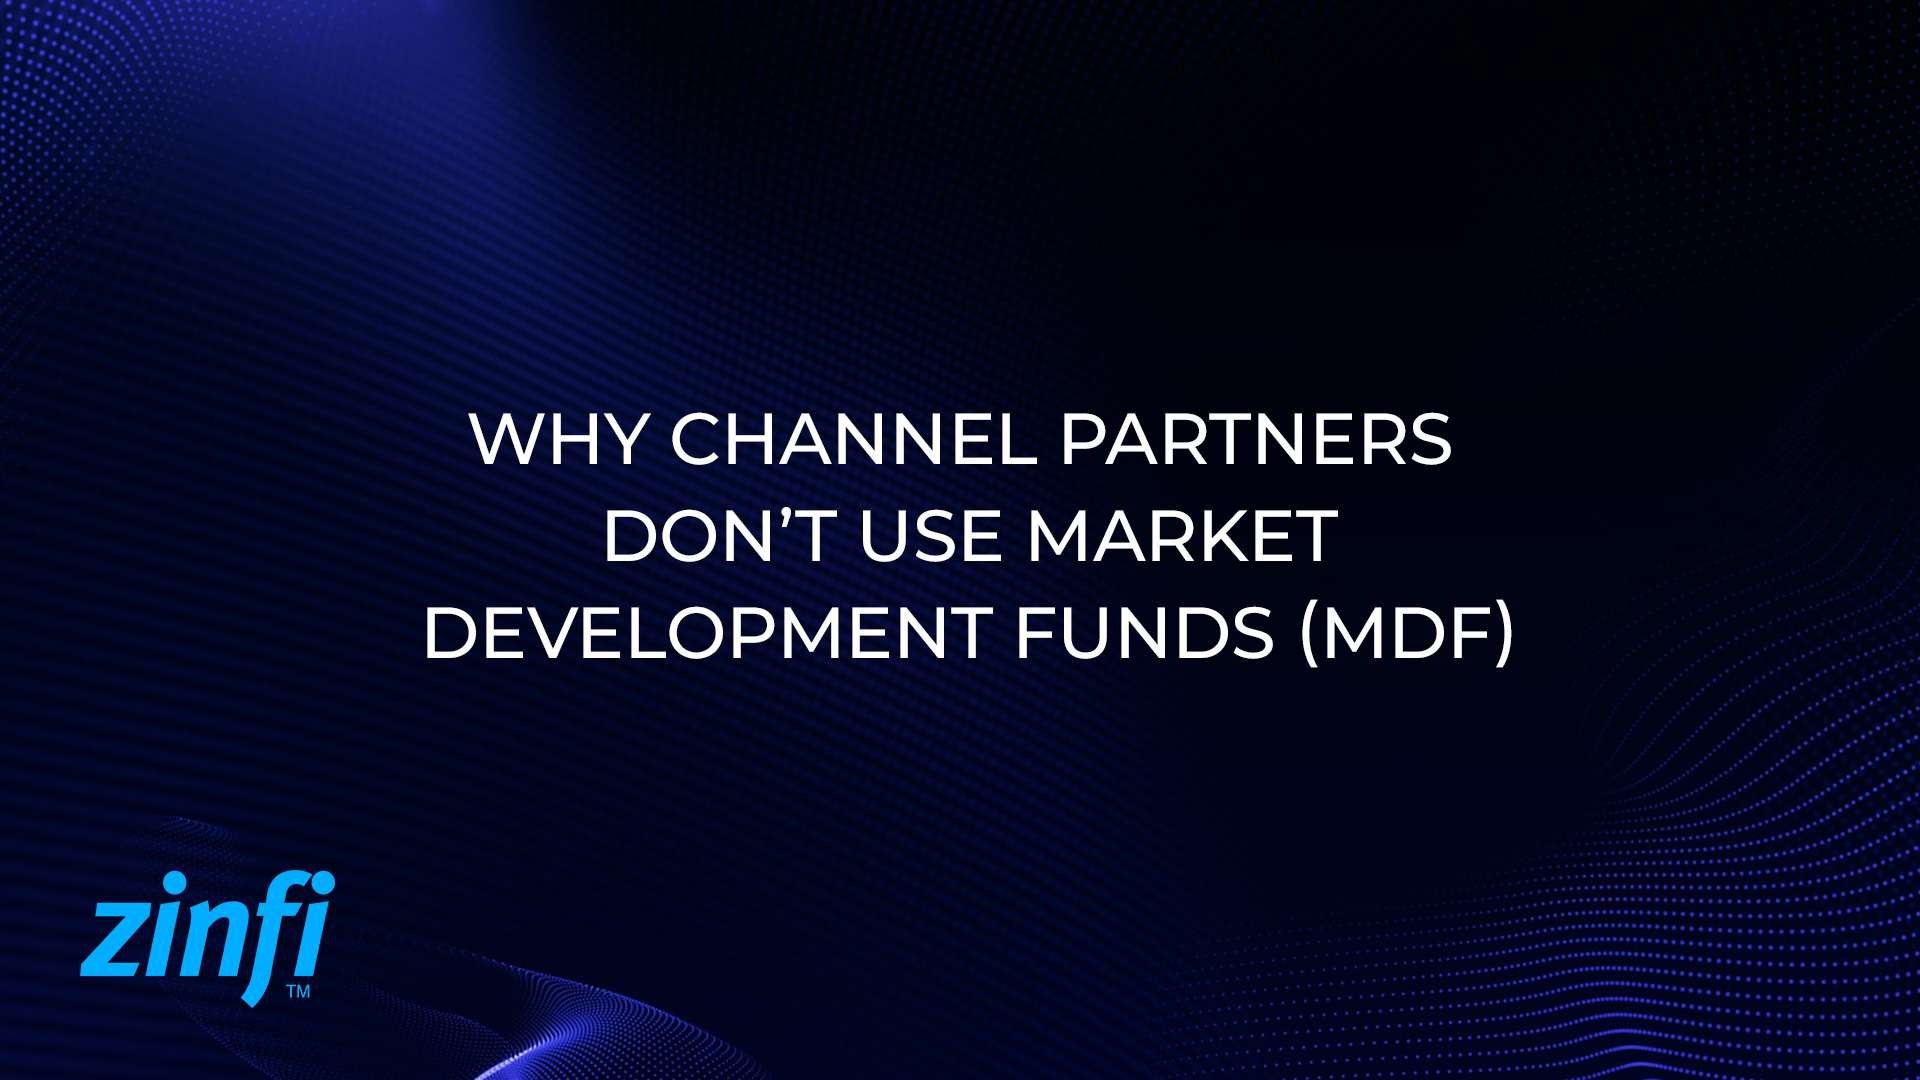 Why Channel Partners Don’t Use Market Development Funds